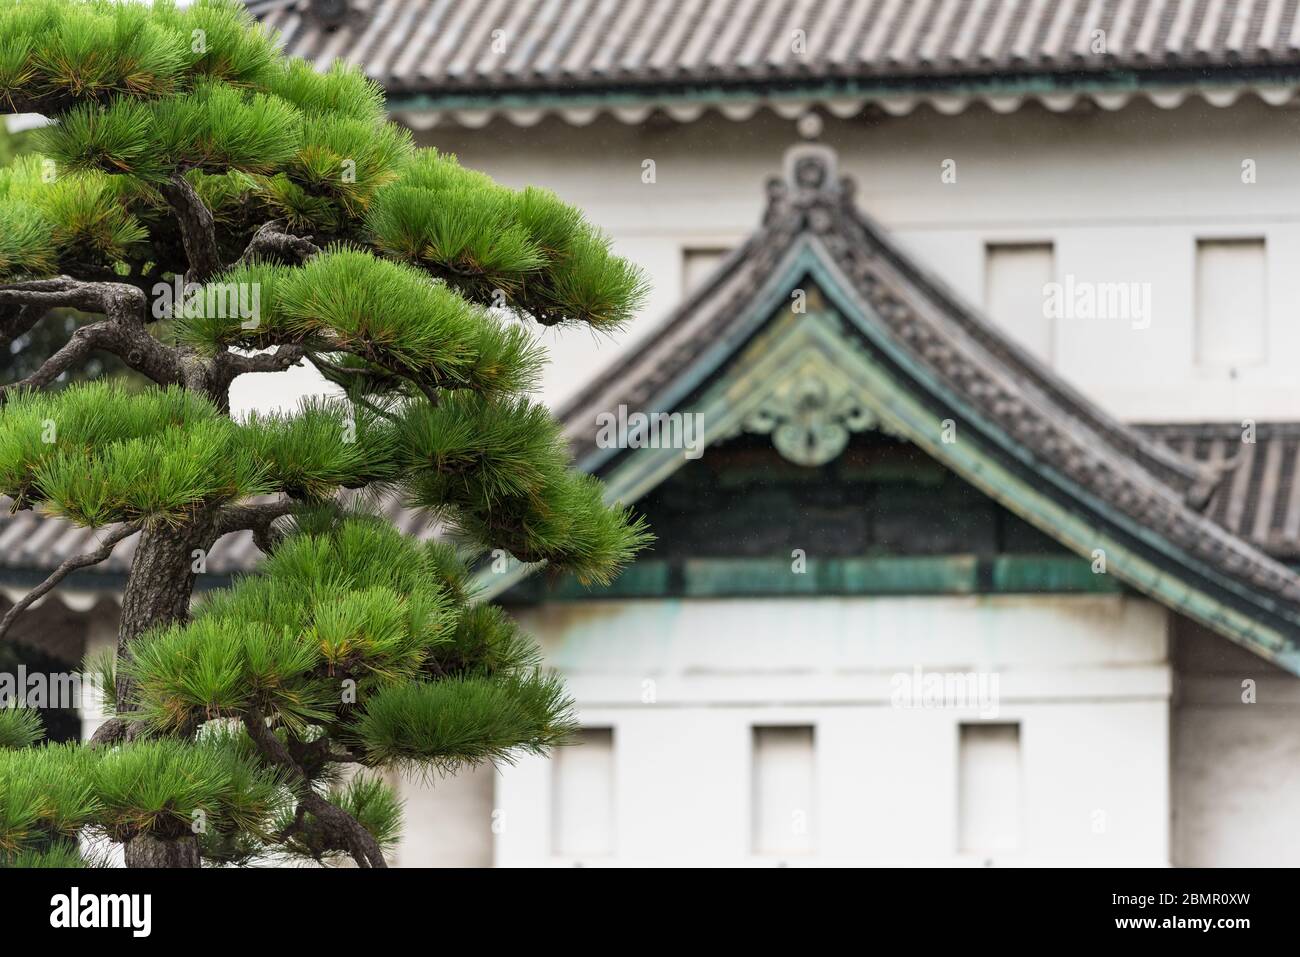 Close up of beautiful green pine tree branches with traditional Japanese building on the background Stock Photo